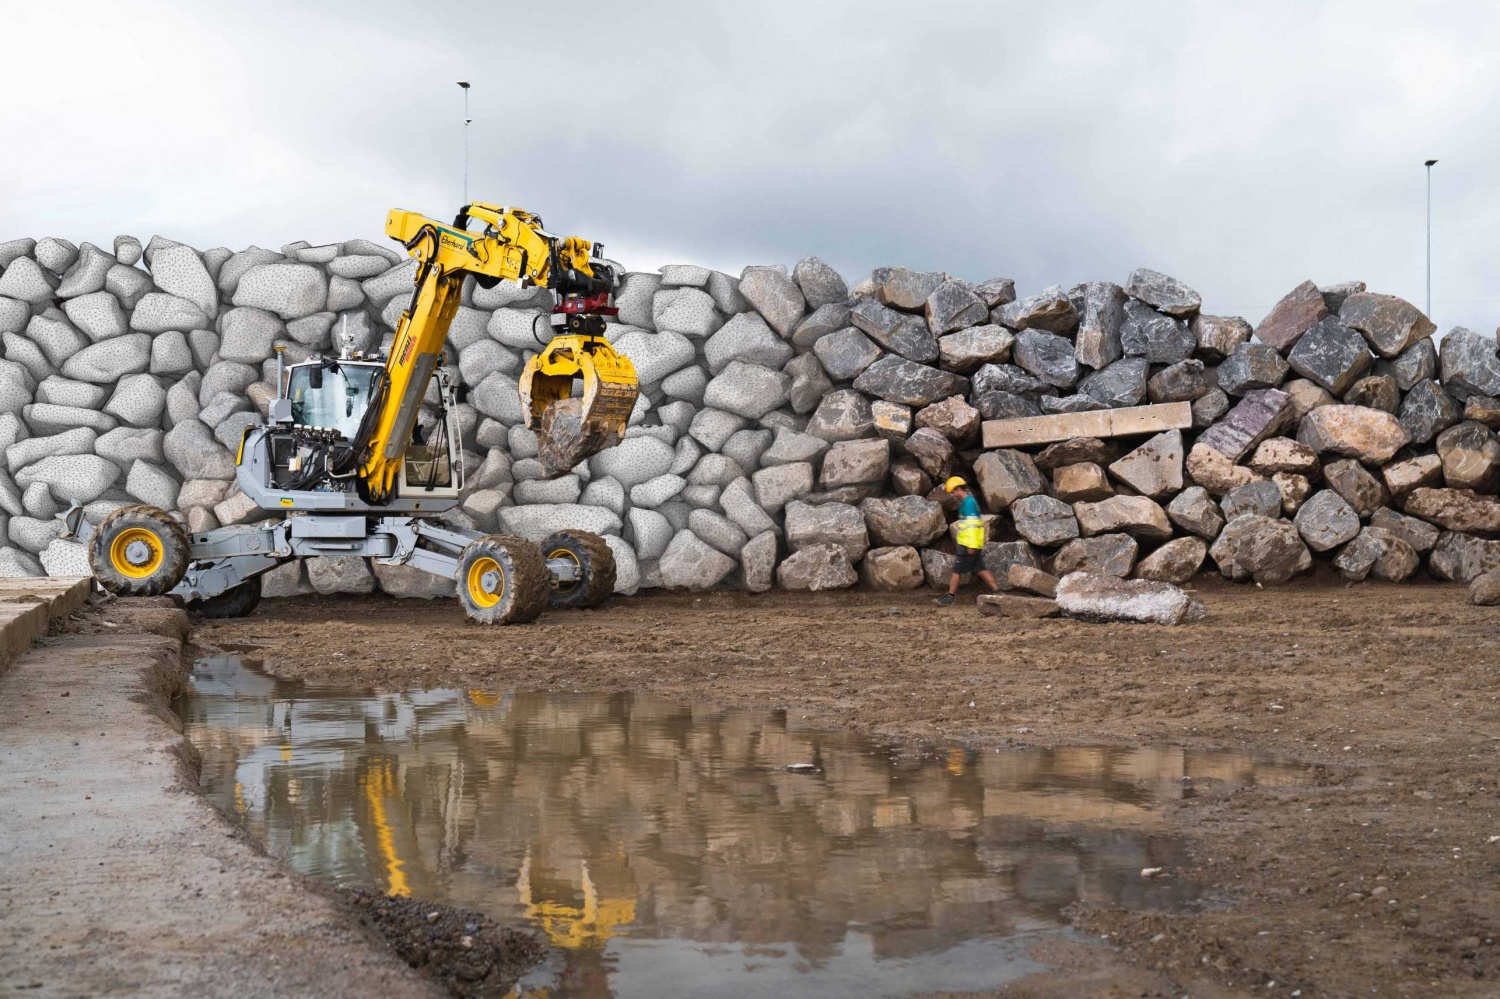 Robotic Excavator Builds 6-Meter-High Dry Stone Wall Without Human Assistance